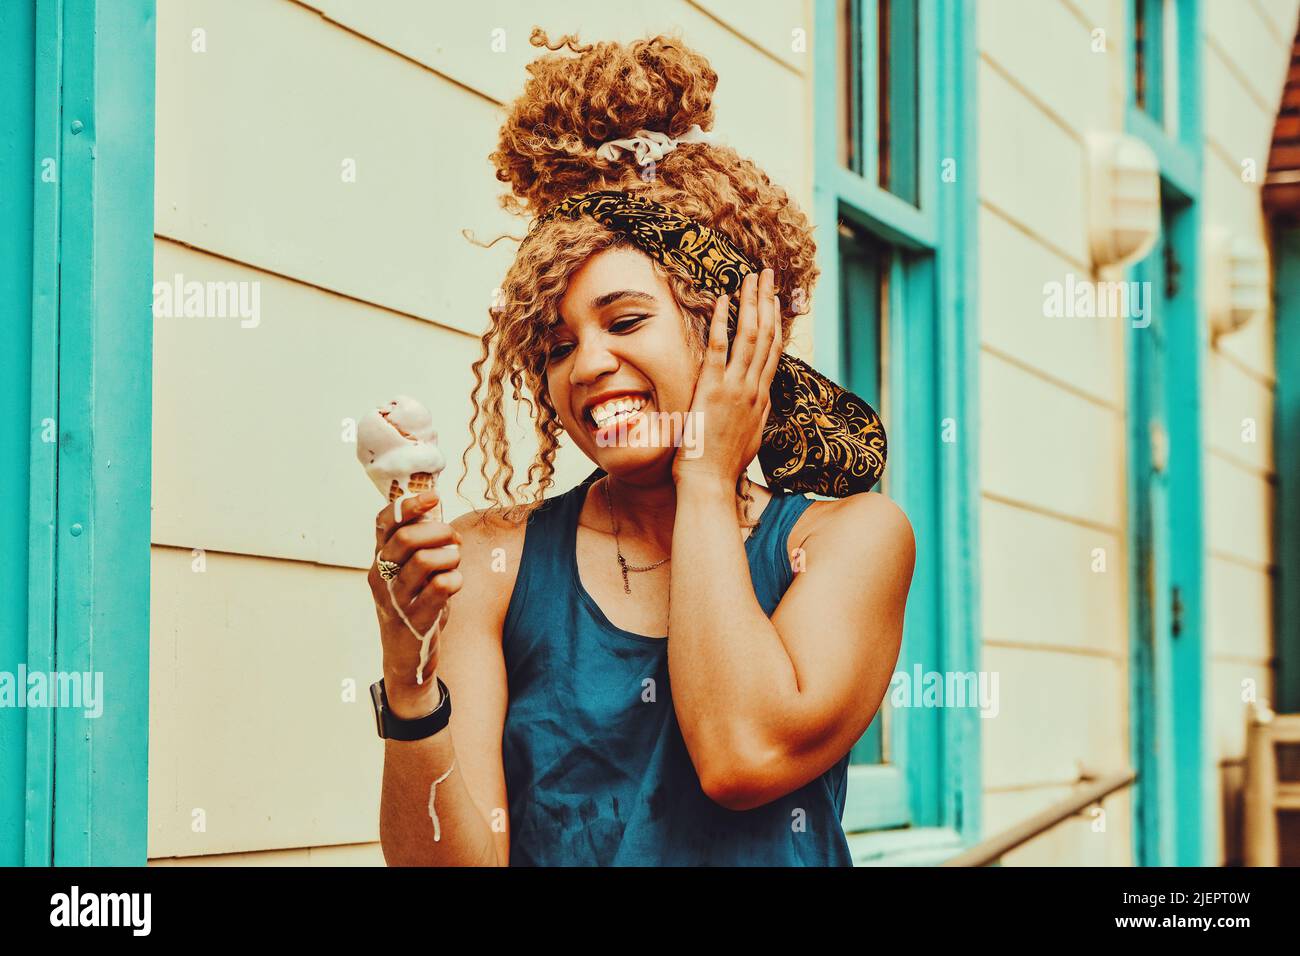 young adult woman afro hair smiling eating ice cream outdoors summertime looking away shot Stock Photo